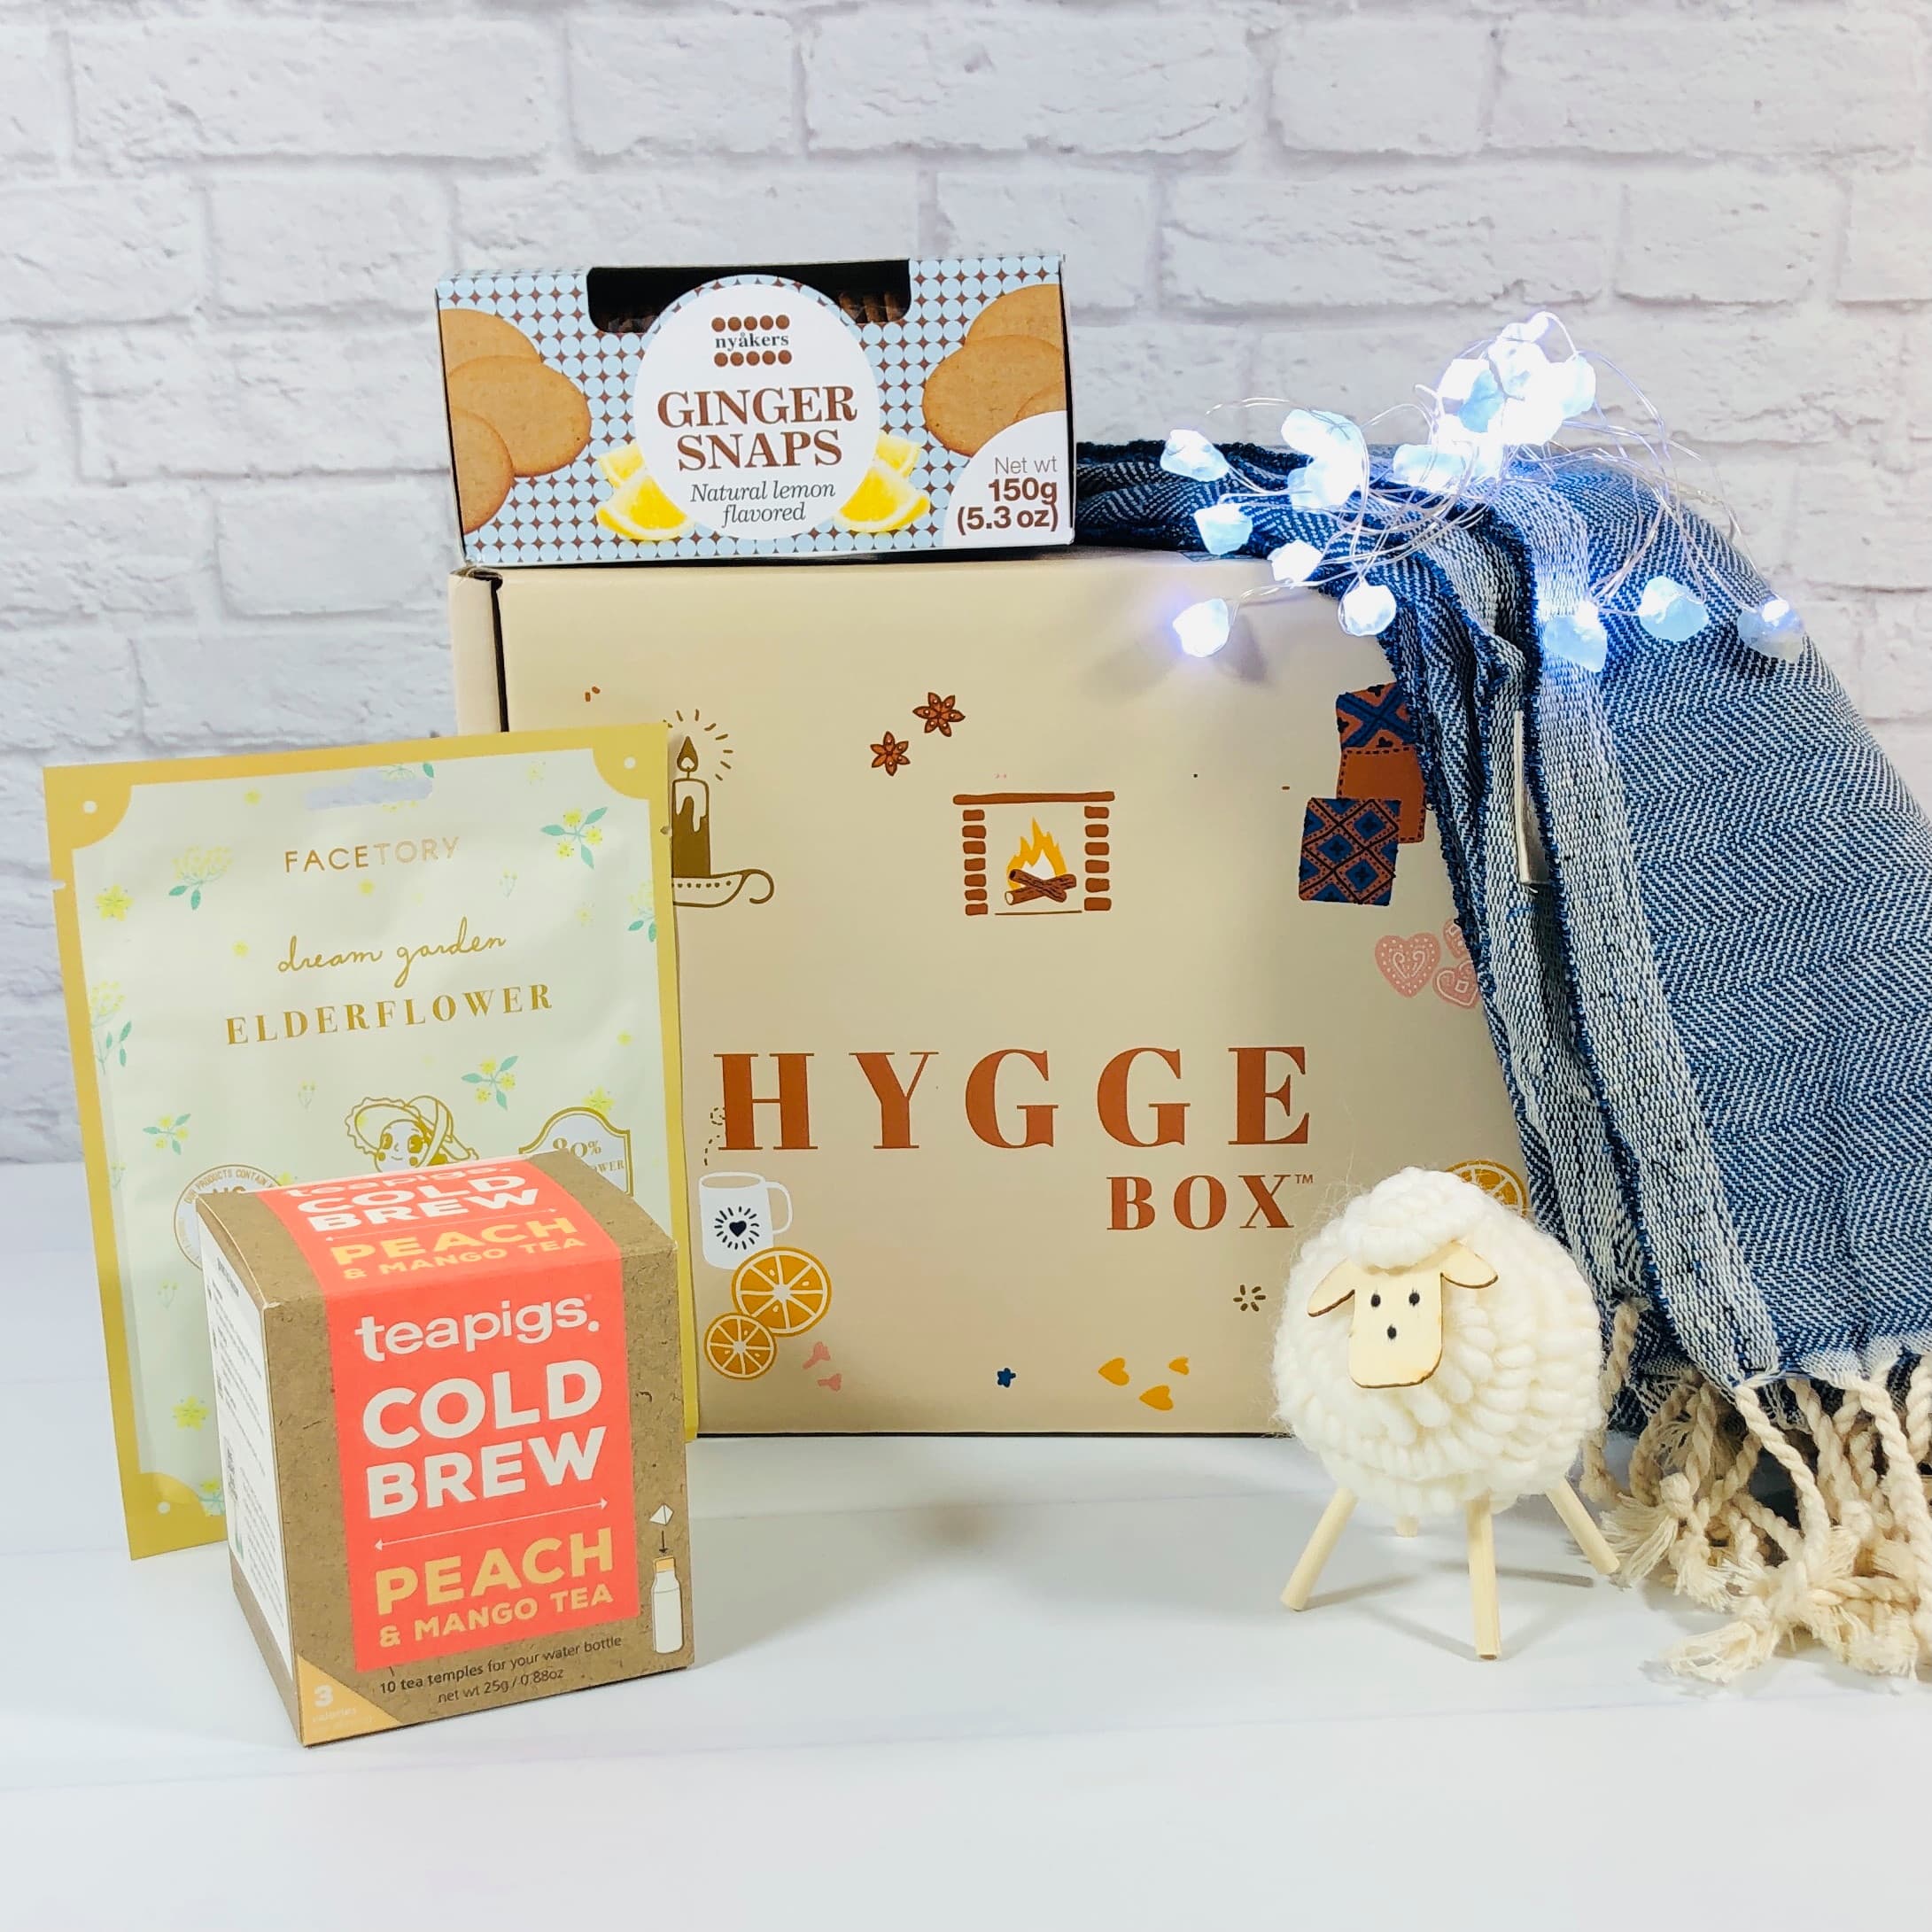 Holiday Gift Box, Christmas Gift Basket, Hygge Gift, Sending a Hug, Gift  Box for Women, Care Package for Her, Thank You Gift, Gift Box Idea 